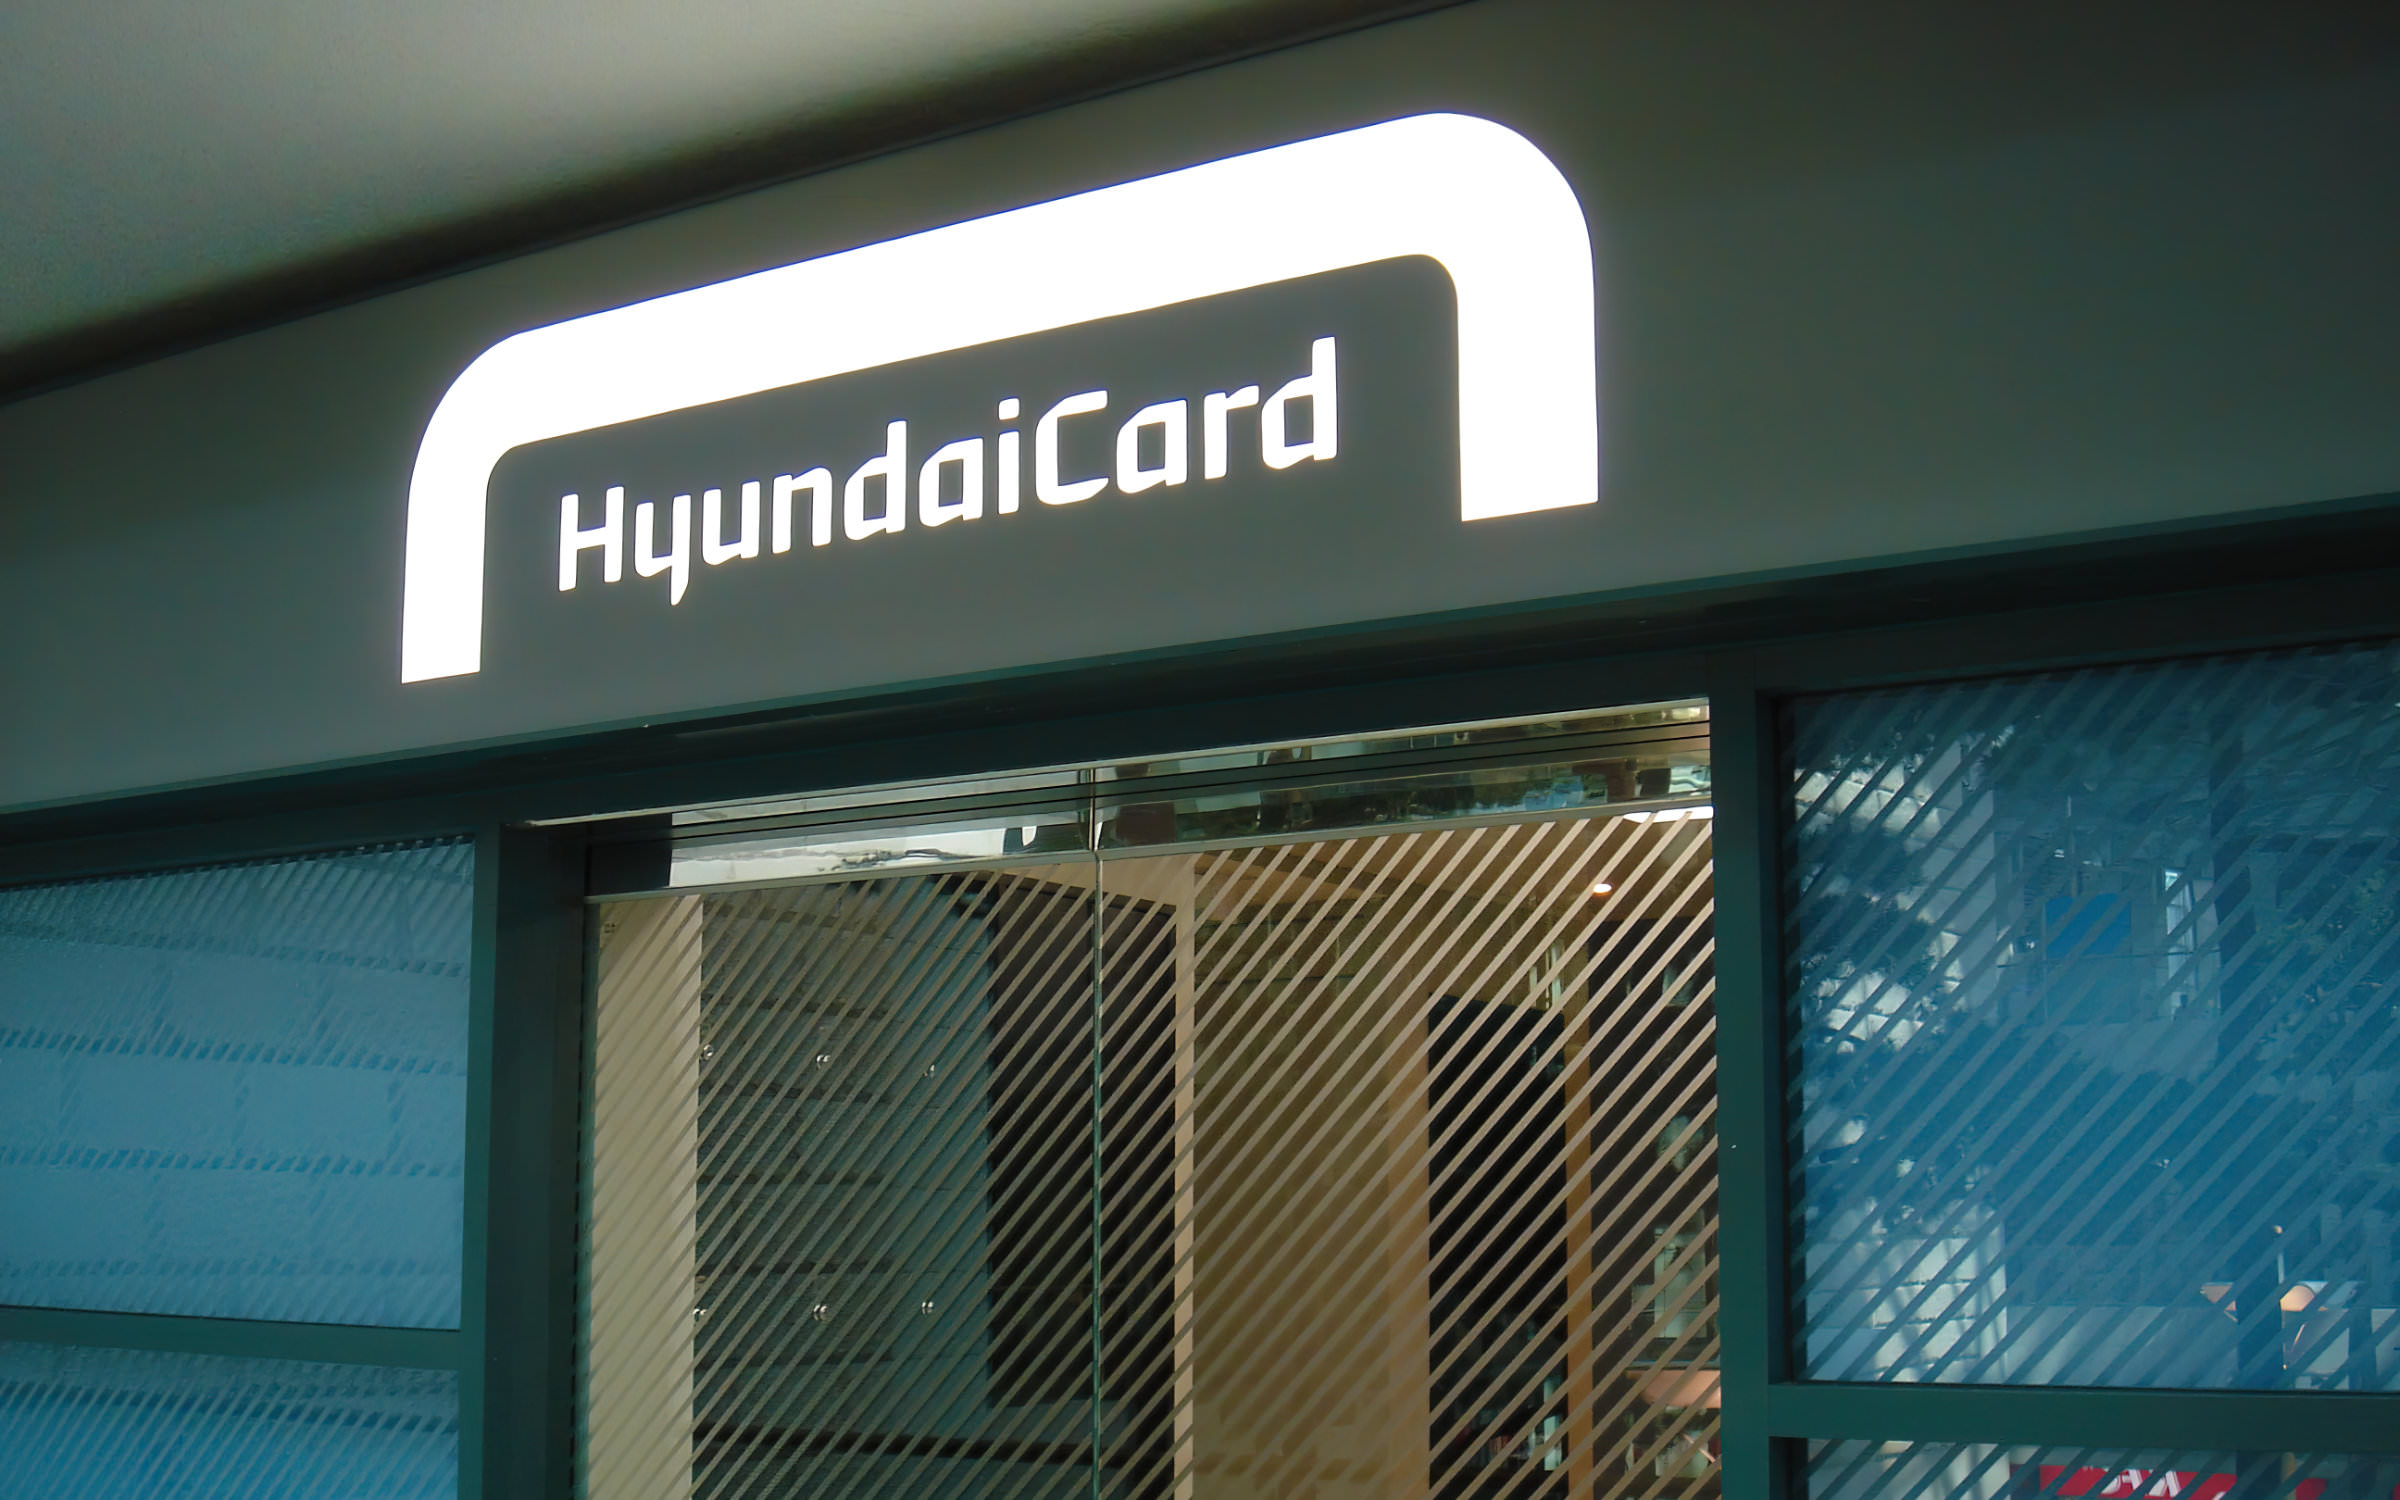 Entry to the Hyundai Card building in Seoul